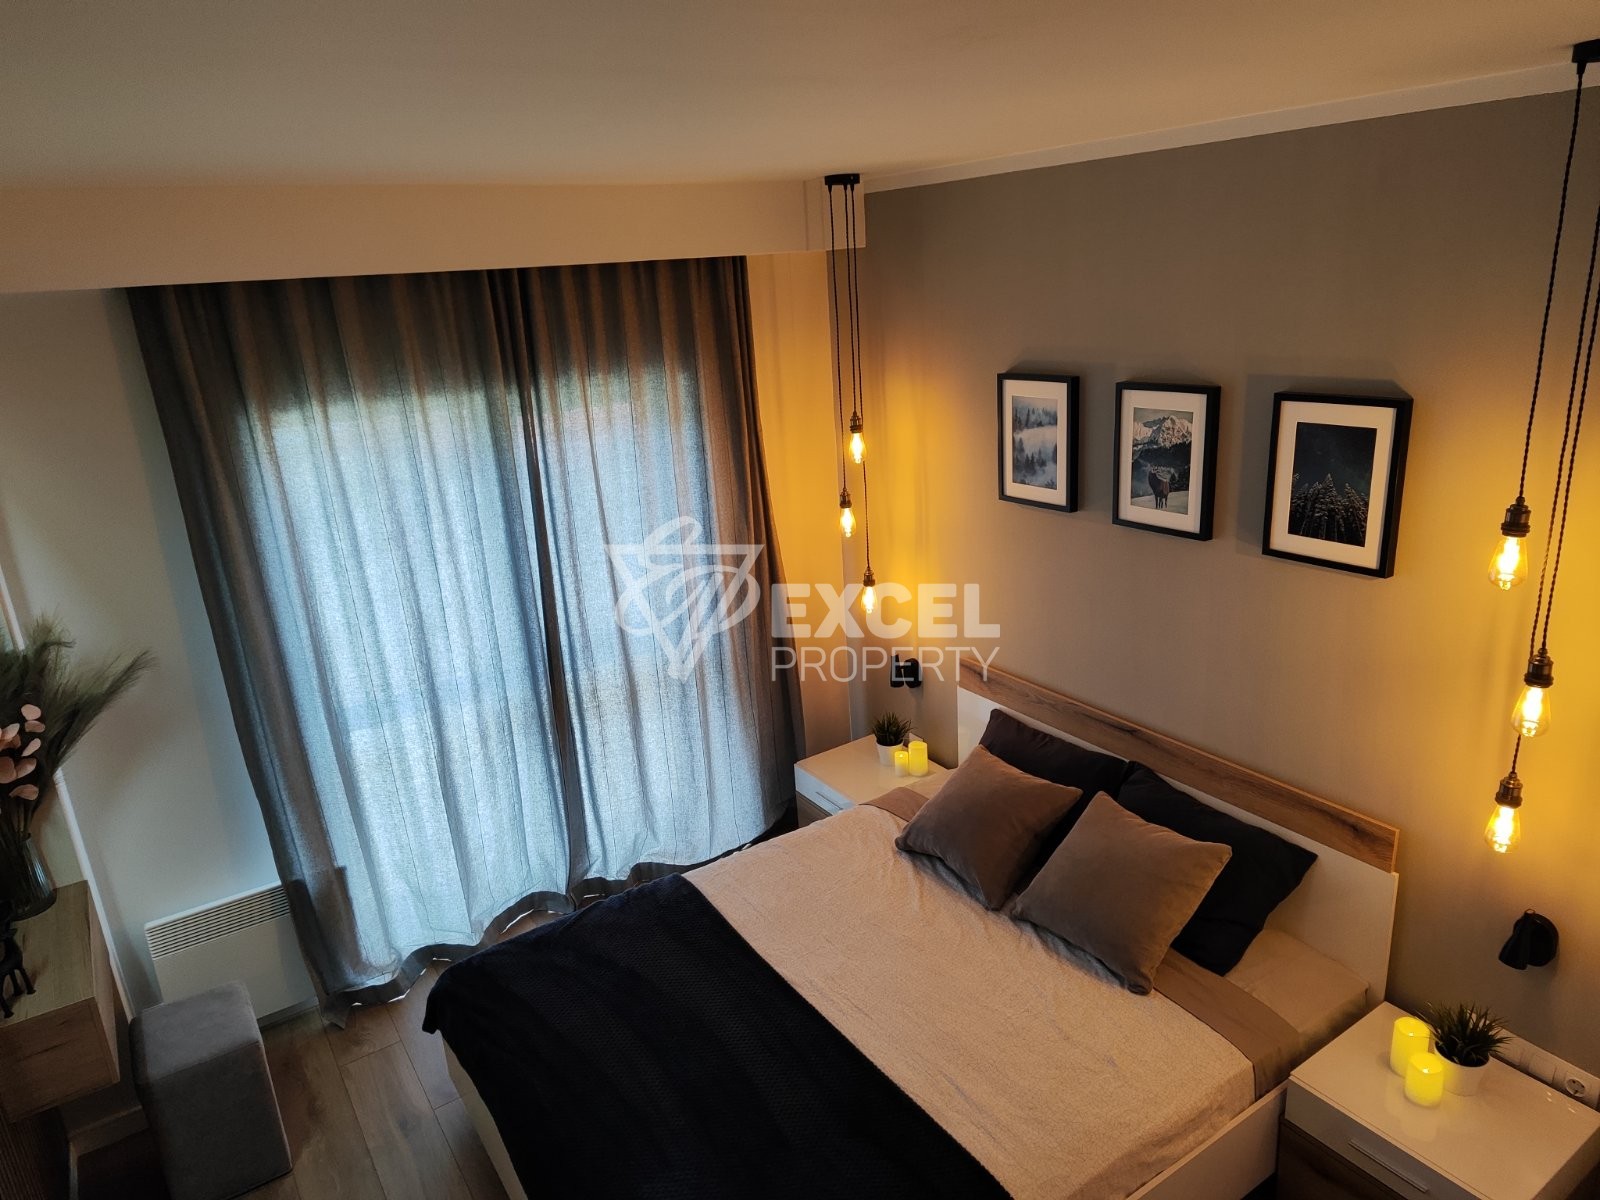 Elegantly furnished two-bedroom apartment with a low maintenance fee